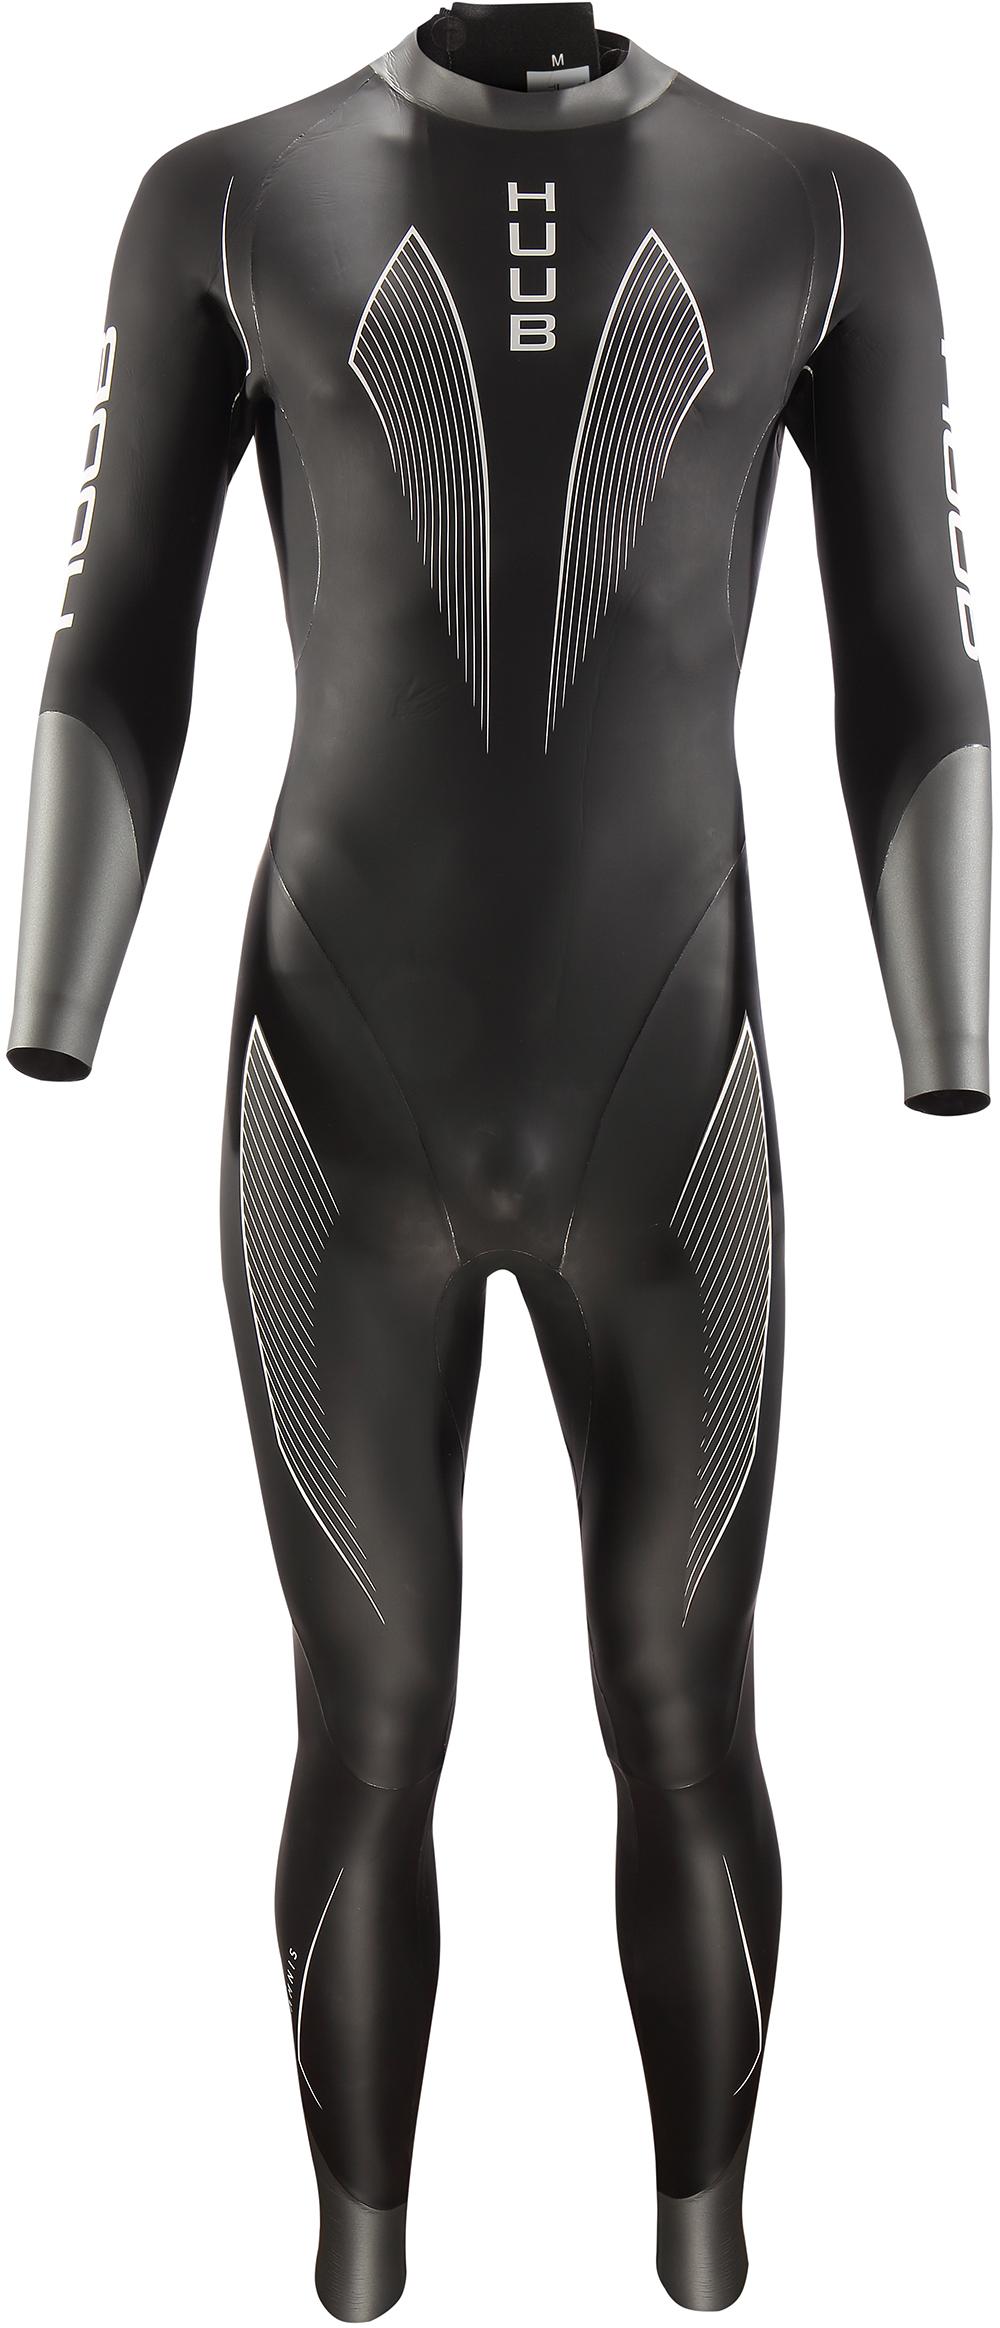 Huub Amnis Wetsuit - Wiggle Exclusive - Black/silver